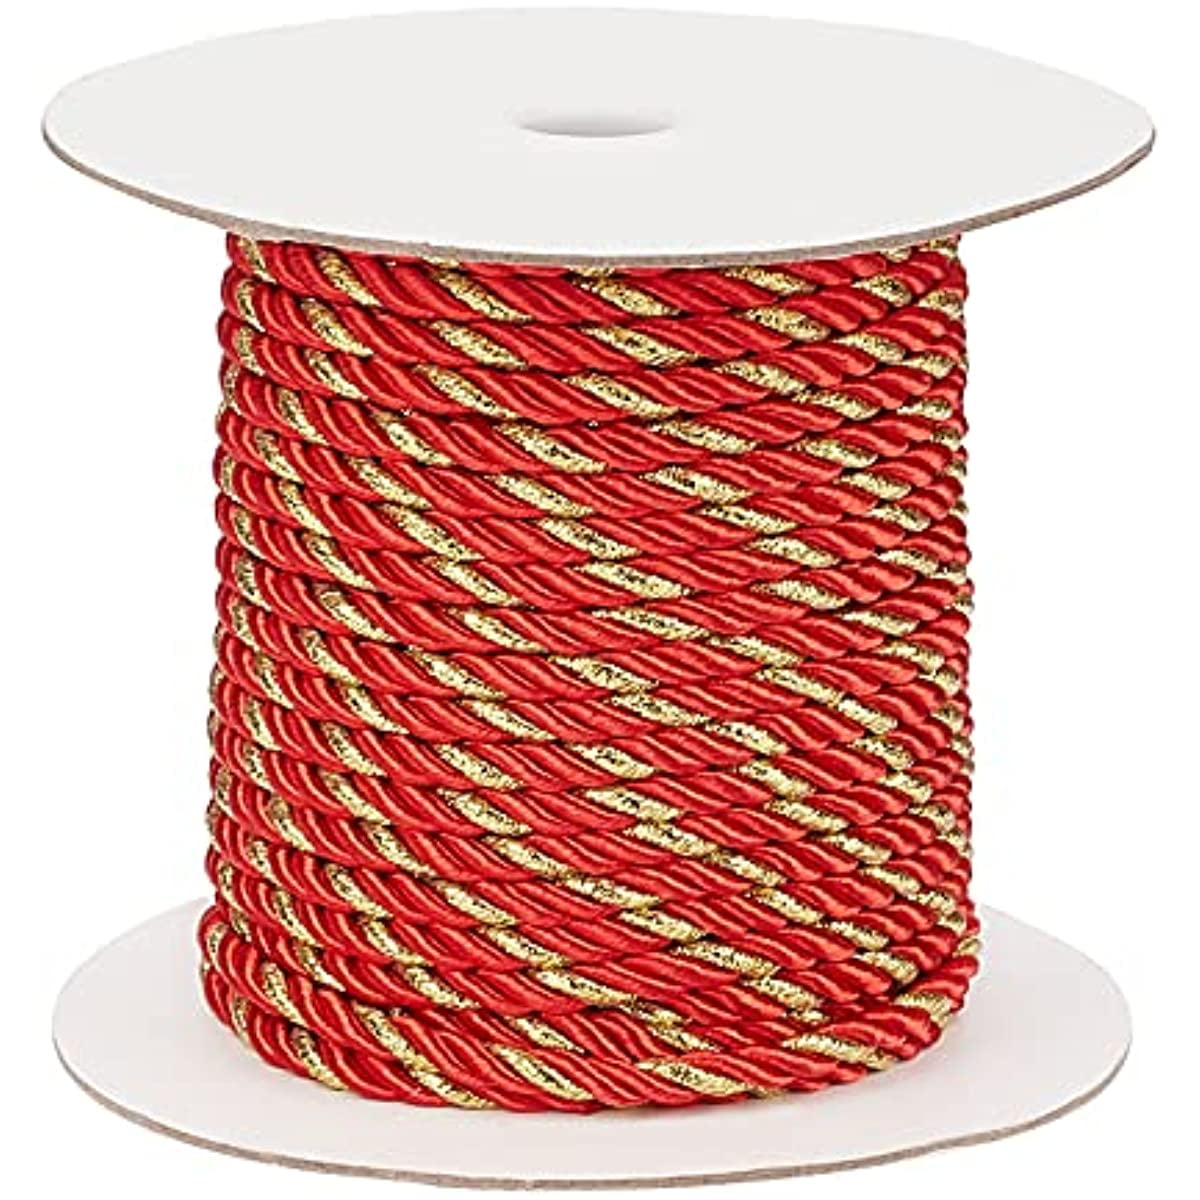 25 Yards Twisted Cord Trim Orange Red Nylon Twisted Cord Rope3-Ply ...